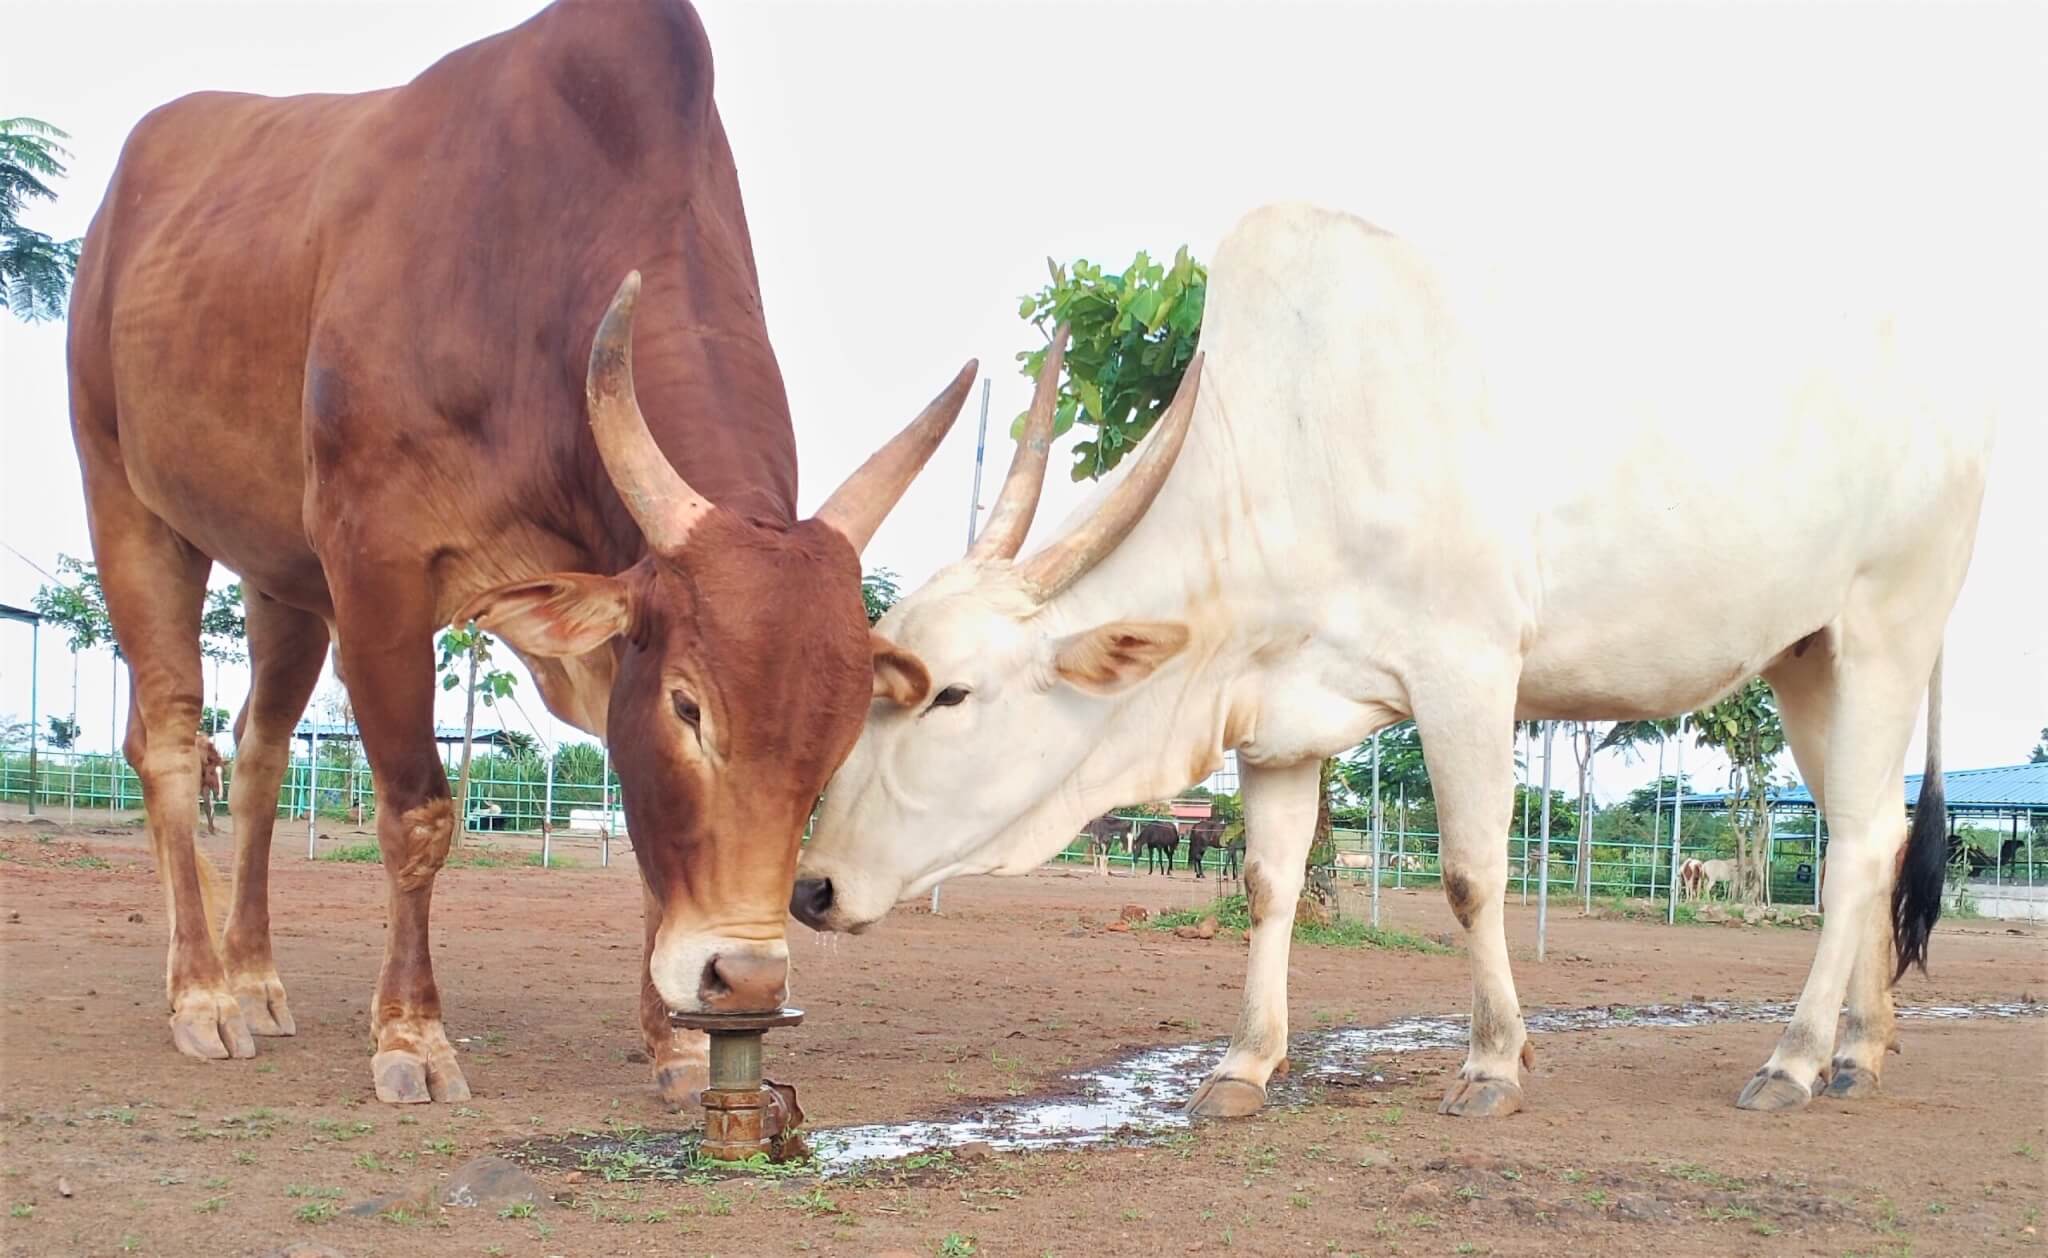 Sharon and Hanmanth enjoy a drink of fresh water from a sprinkler on the sanctuary grounds.